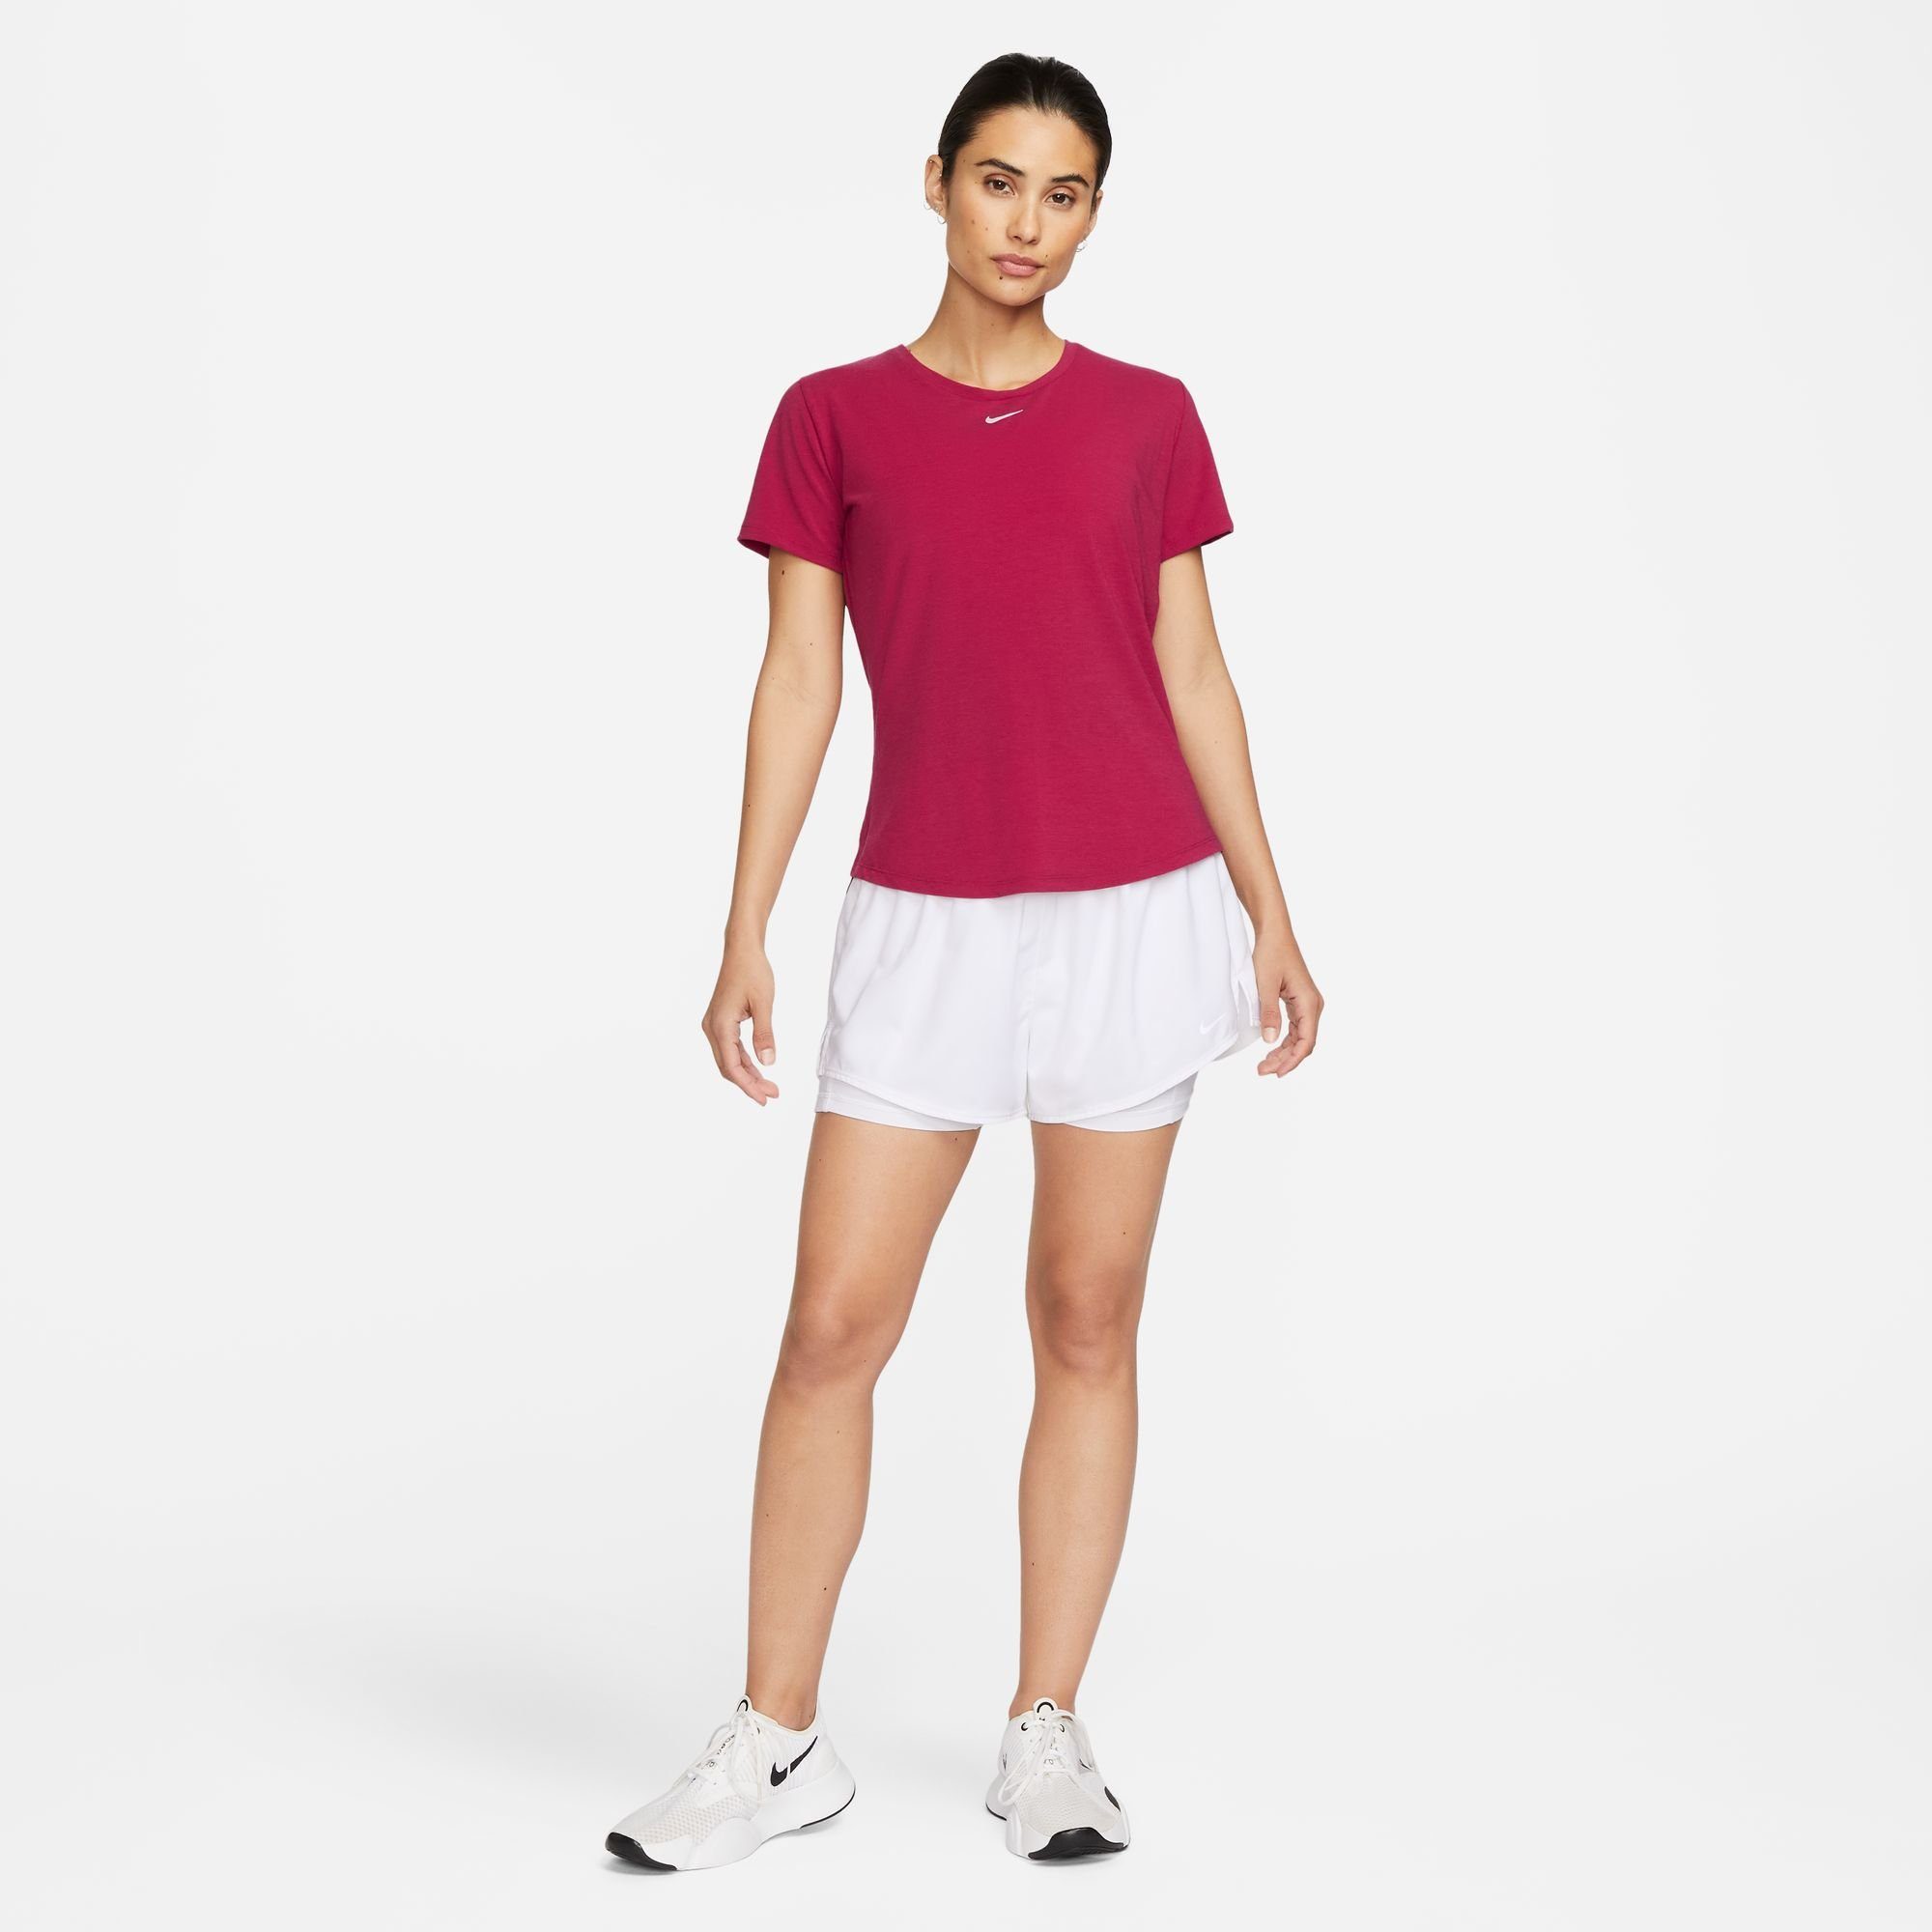 UV SHORT-SLEEVE WOMEN'S ONE Nike Trainingsshirt STANDARD FIT RED/REFLECTIVE LUXE NOBLE SILV TOP DRI-FIT